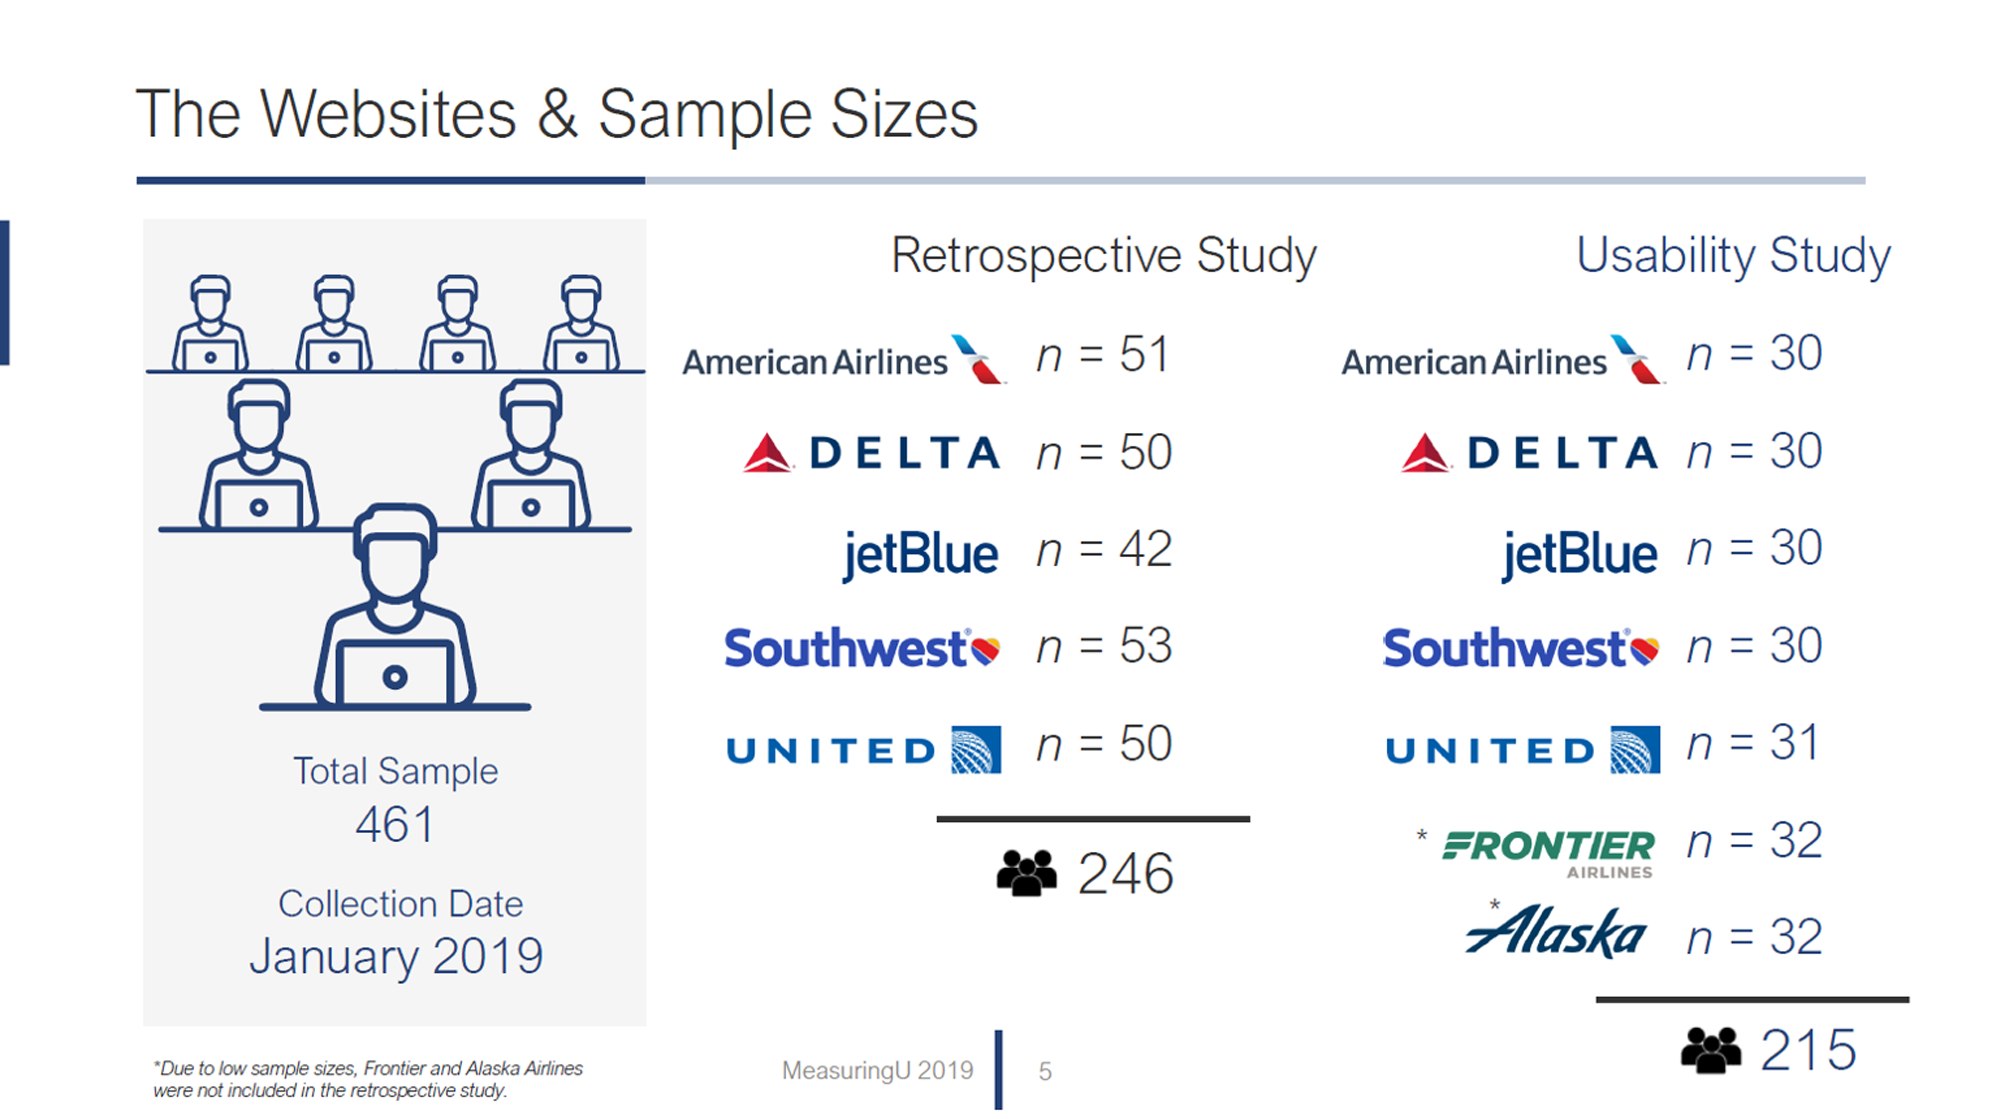 UX & NPS Benchmark Report for US Airlines (2019)